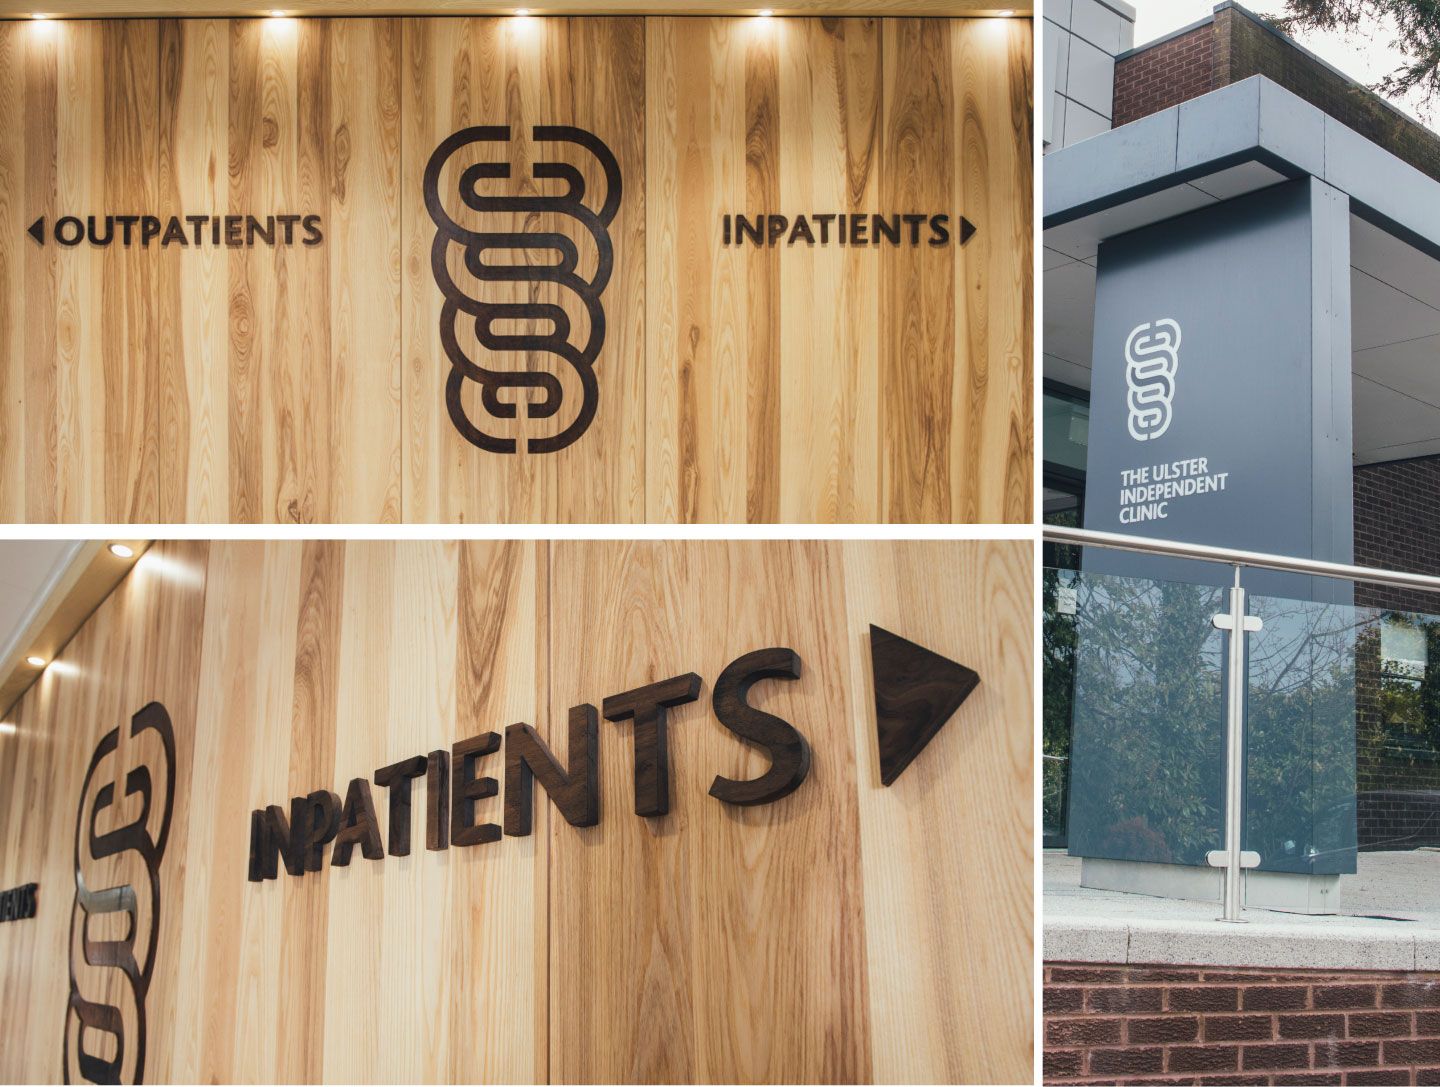 ulster independent clinic branding and web design signage